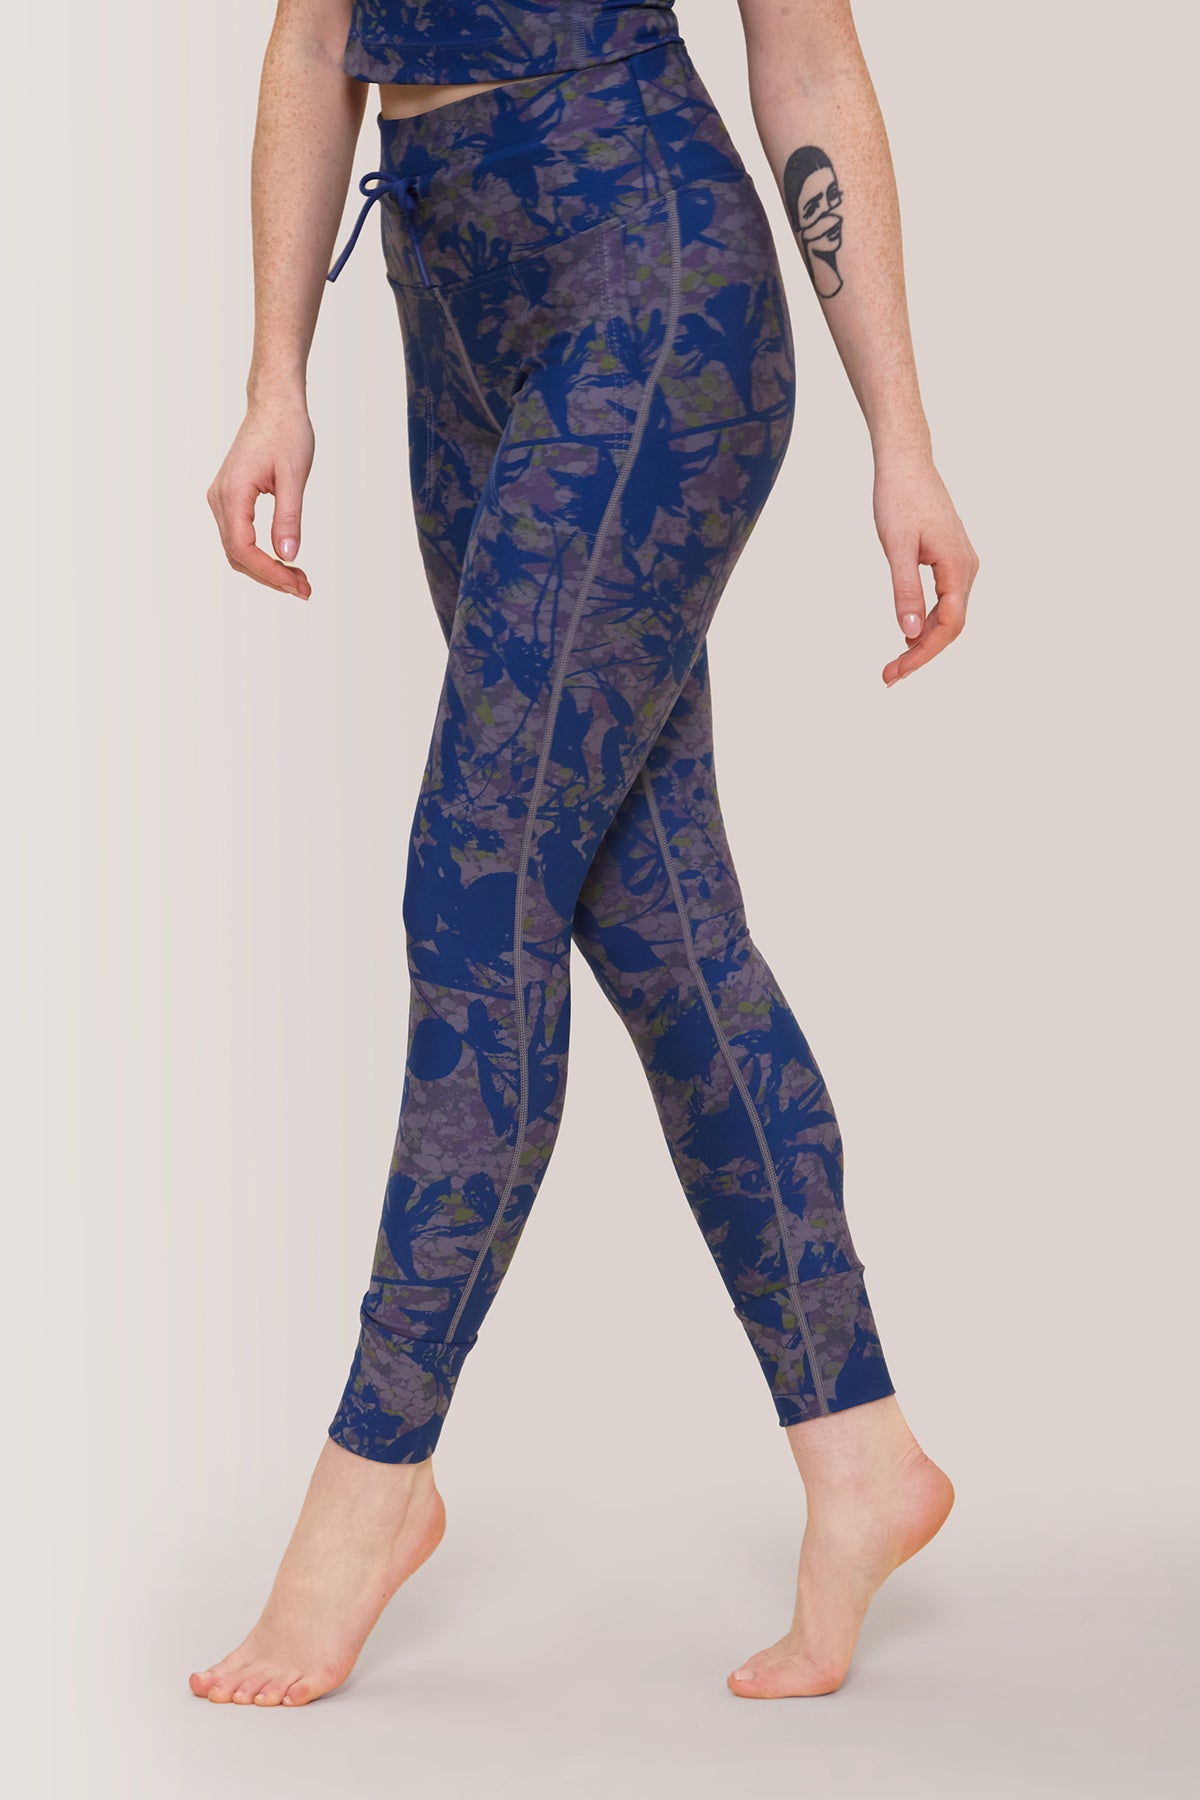 Femme qui porte le legging avec pochettes Stay Flex de Rose Boreal./ Women wearing the Stay Flex Legging with Pockets from Rose Boreal. - Ice Orchid / Orchidee de Glace